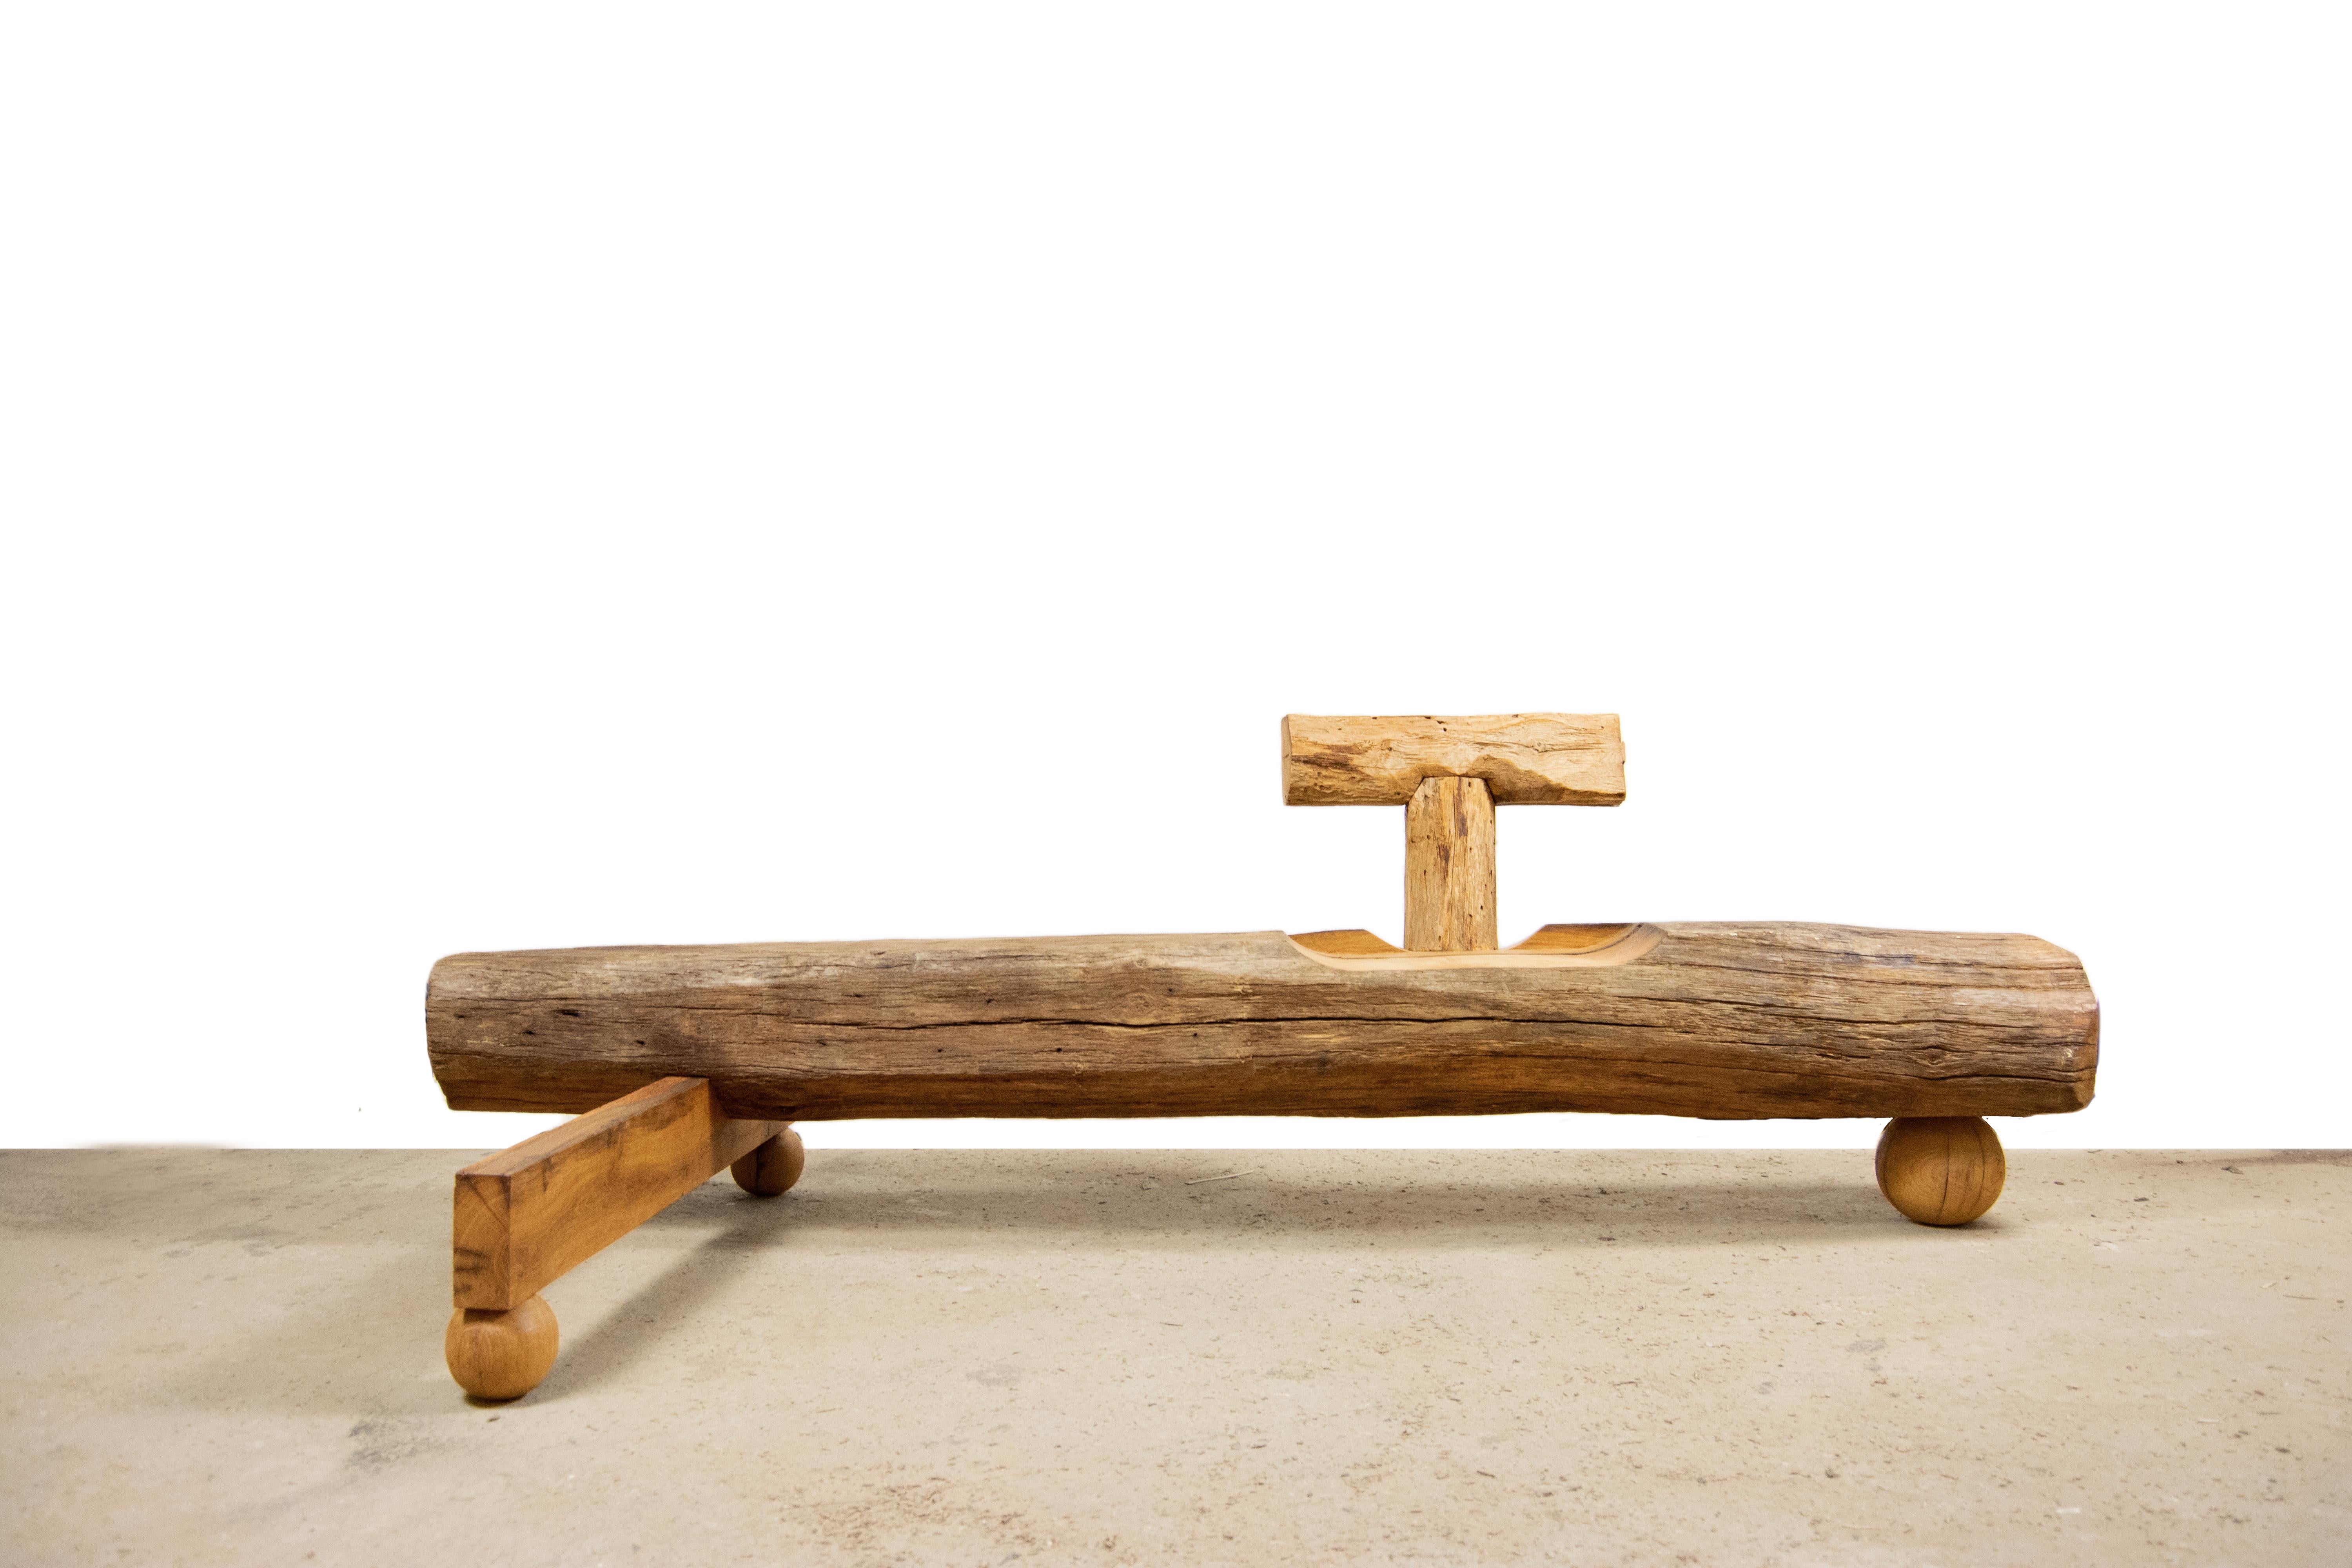 Contrepoids bench by Atelier Musset and Erik Järkil
Atelier Musset, Erik Järkil
Edition of 10
Dimensions: D 95 x W 200 x H 63 cm
Materials: Old construction oak from Ile de France, Beeswax

The size may change depending of the woods, the